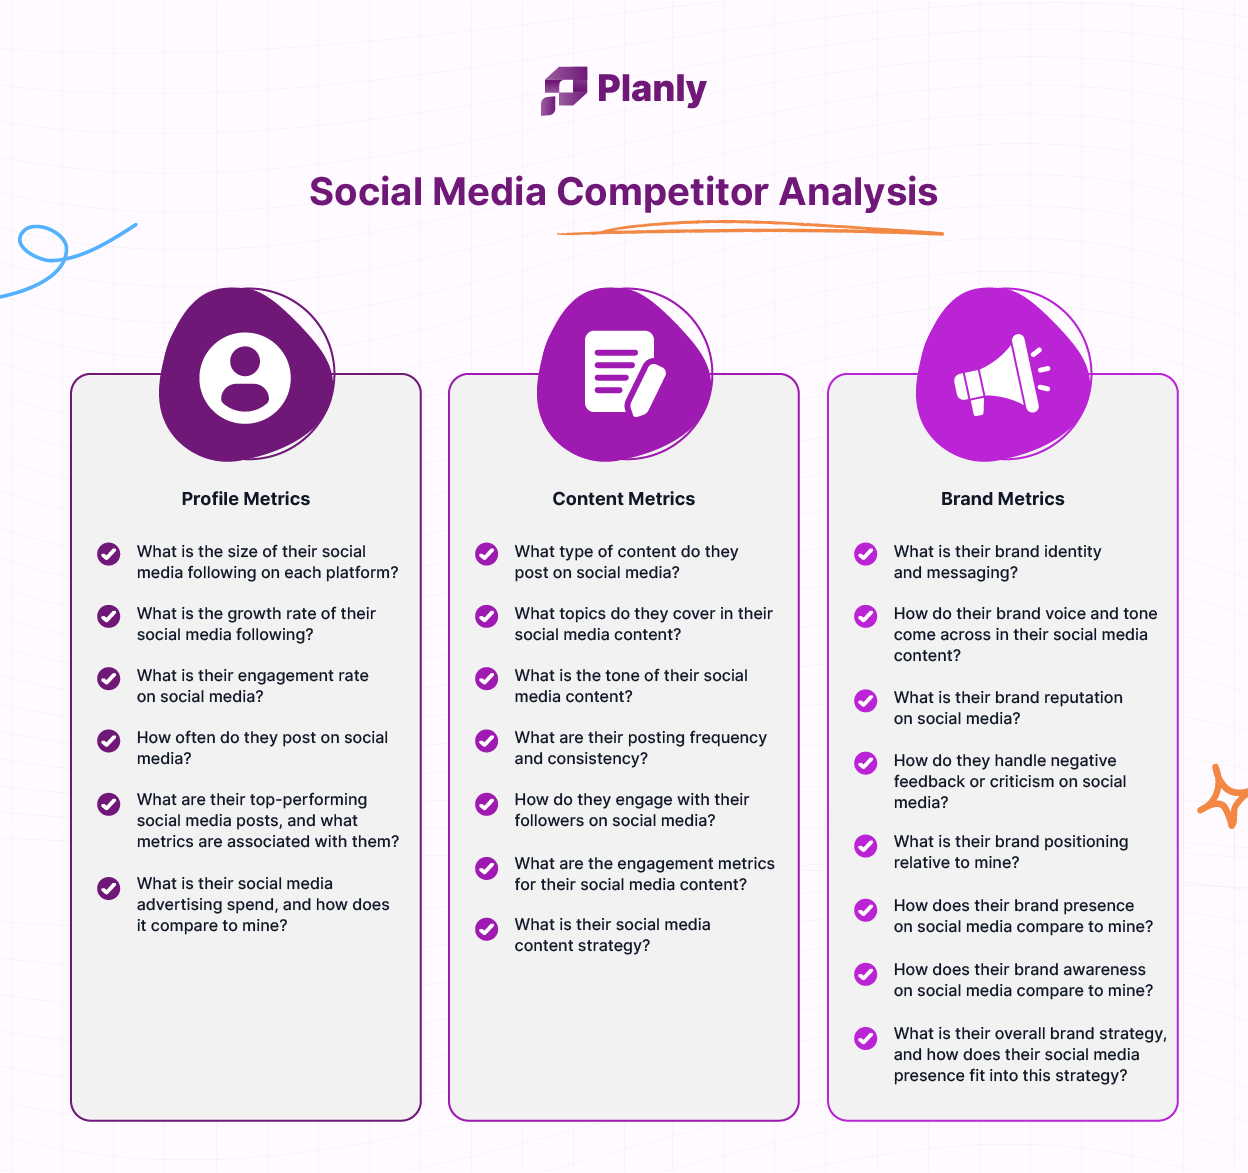 Social media competitor analysis